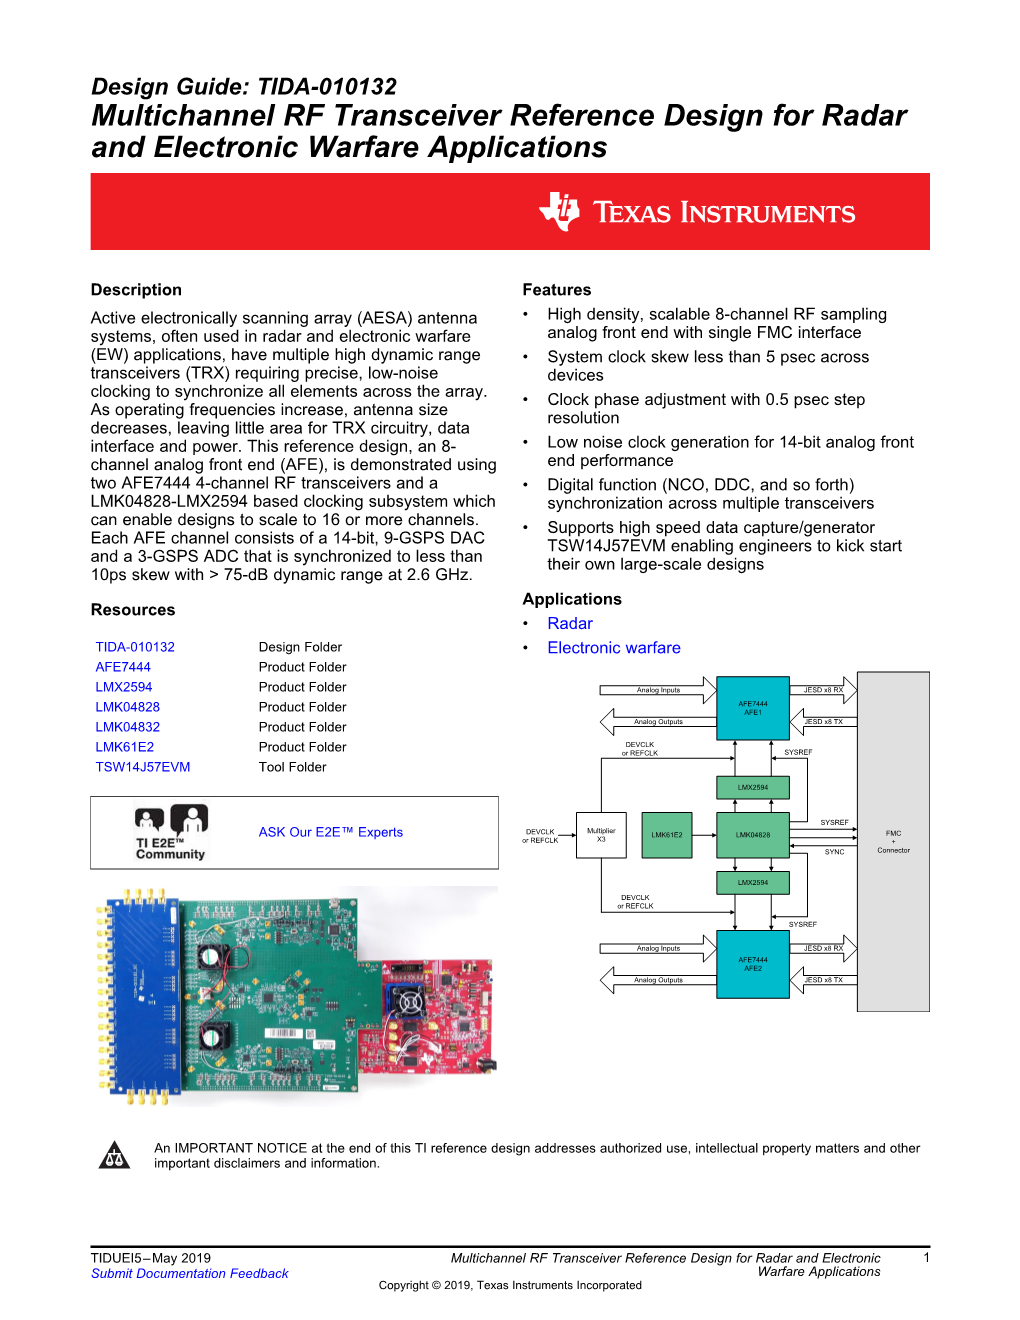 Multichannel RF Transceiver Reference Design for Radar and Electronic Warfare Applications